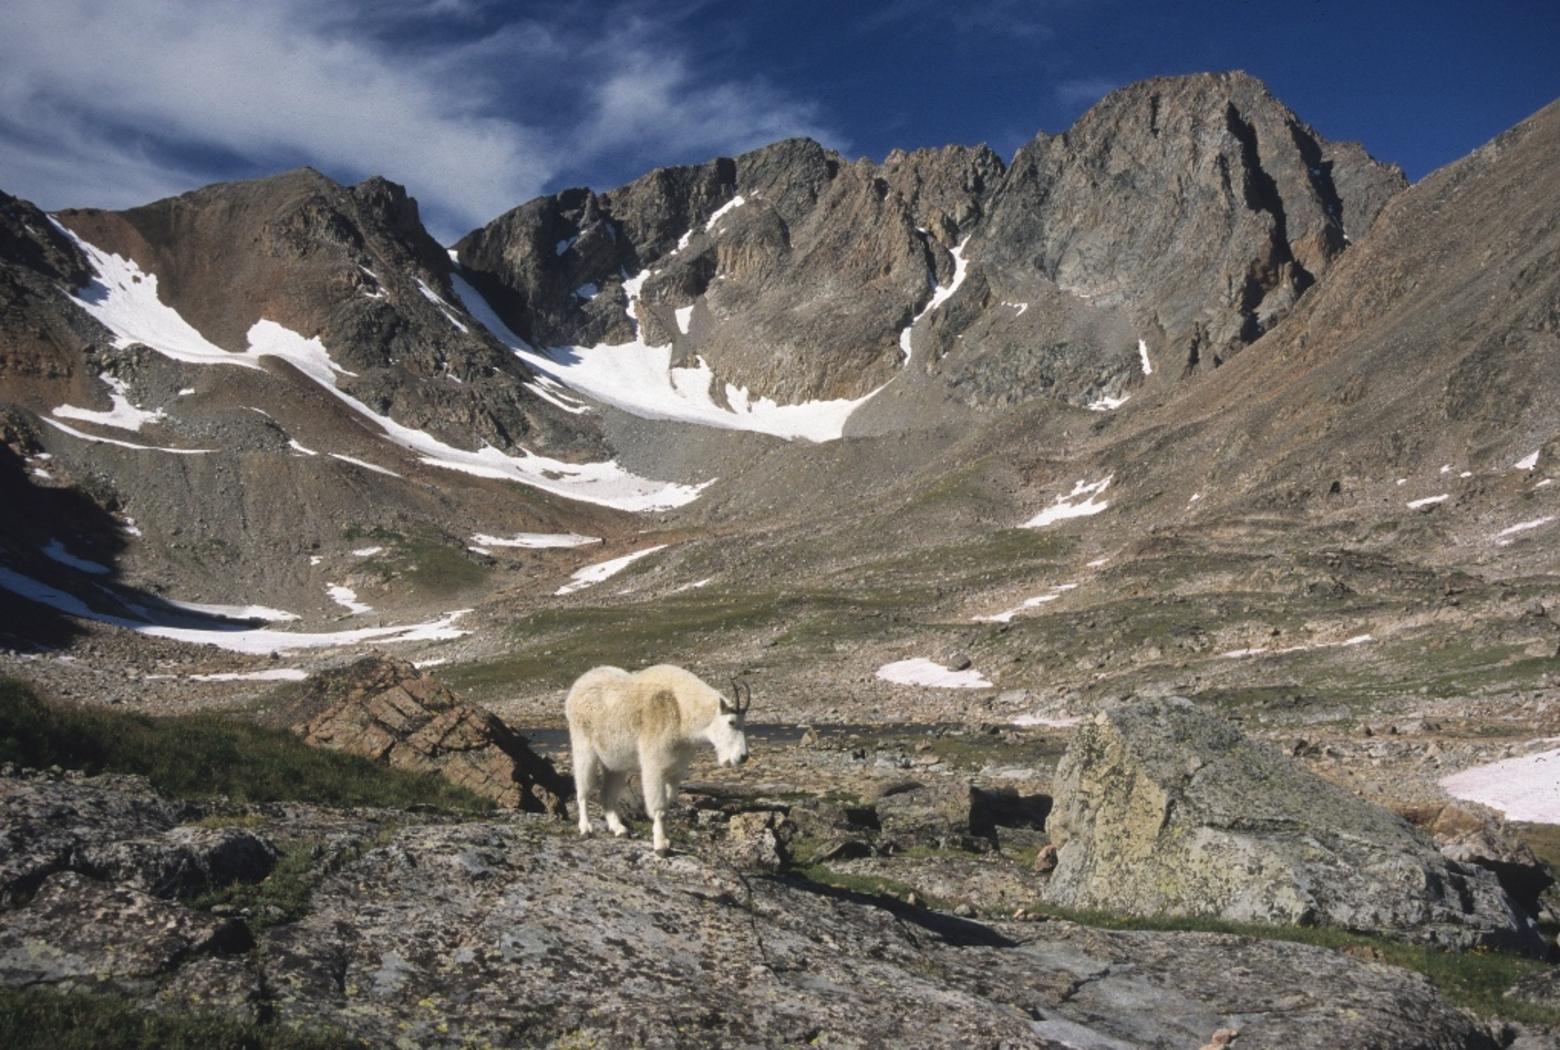 A mountain goat roams the Sky Top drainage below the south face of 12,799-foot Granite Peak – Montana's highest summit located in the Beartooth Mountains. Photo courtesy Rick and Susie Graetz